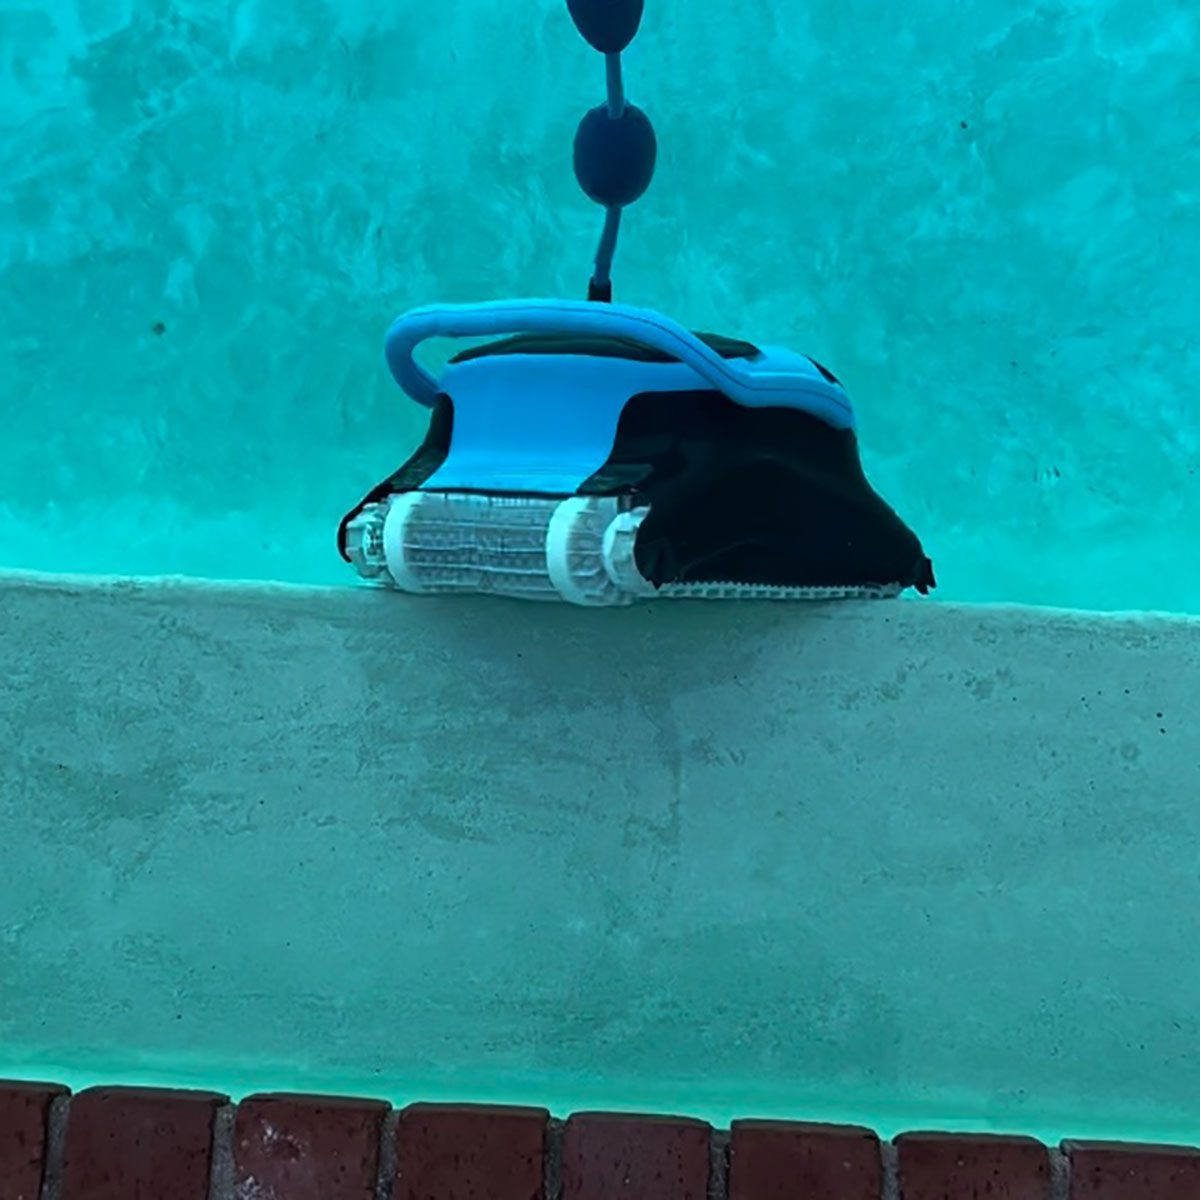 Our Editor-Tested Dolphin Nautilus Robotic Pool Cleaner Review